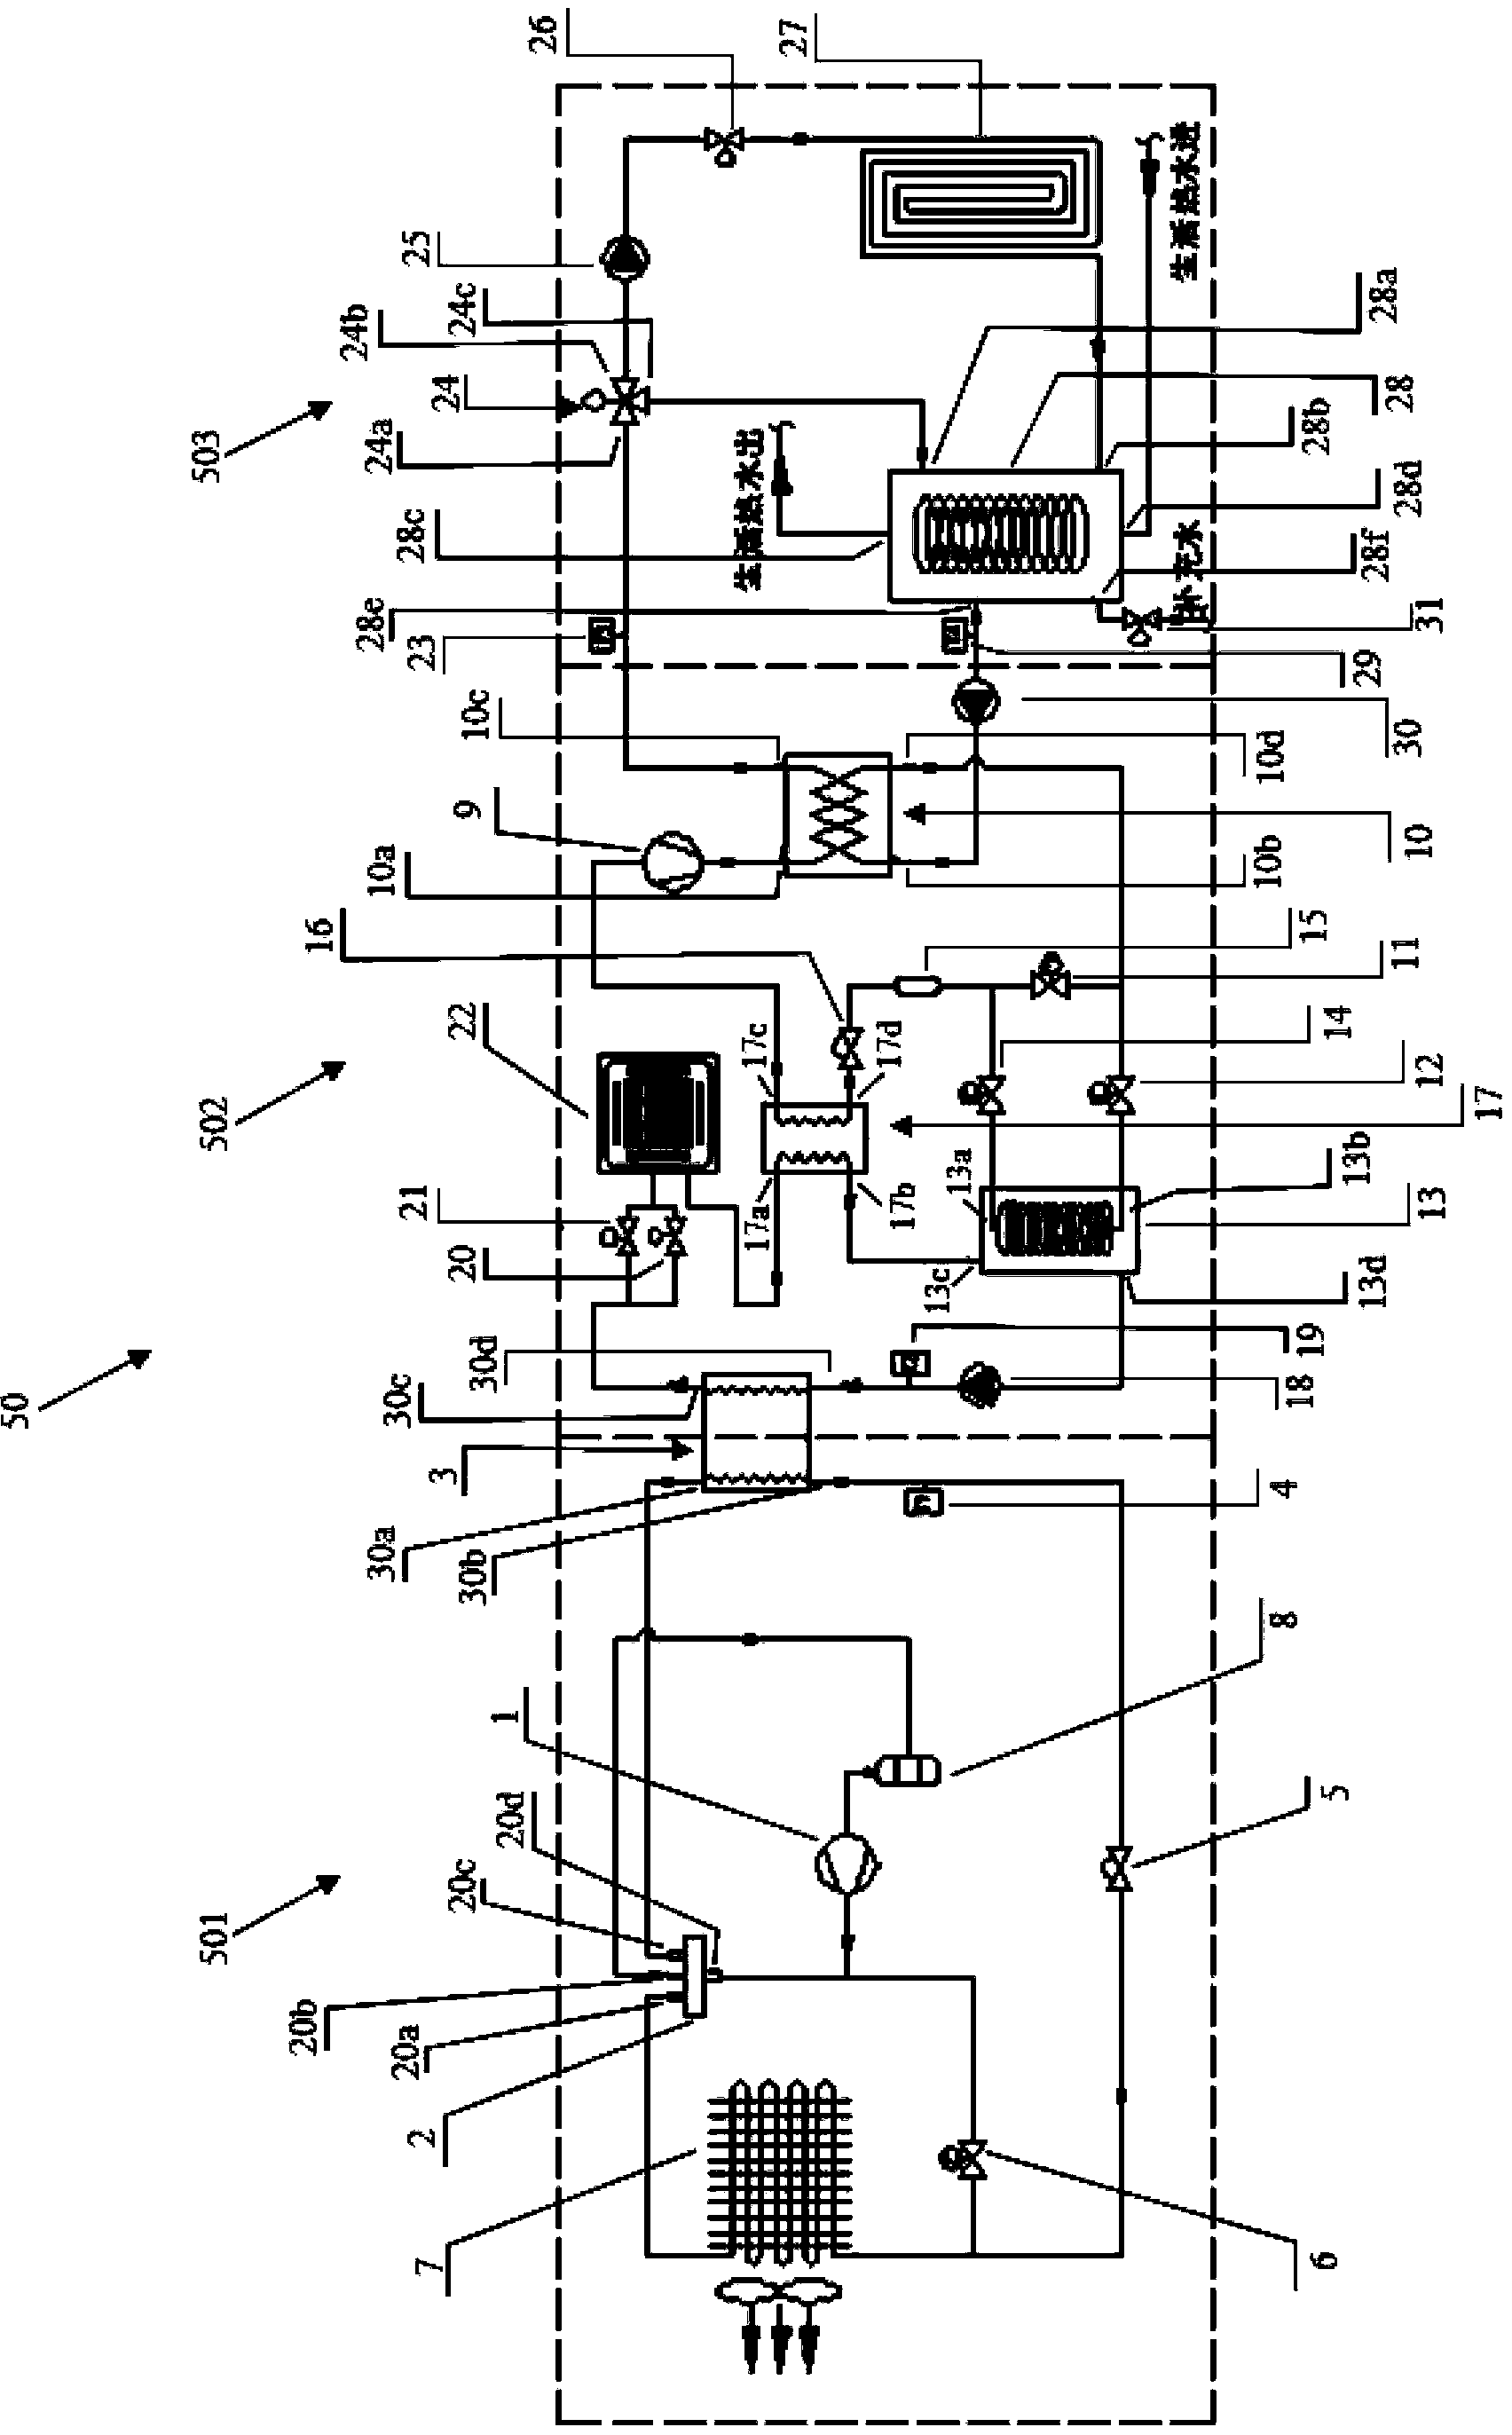 Secondary heat pump combined system